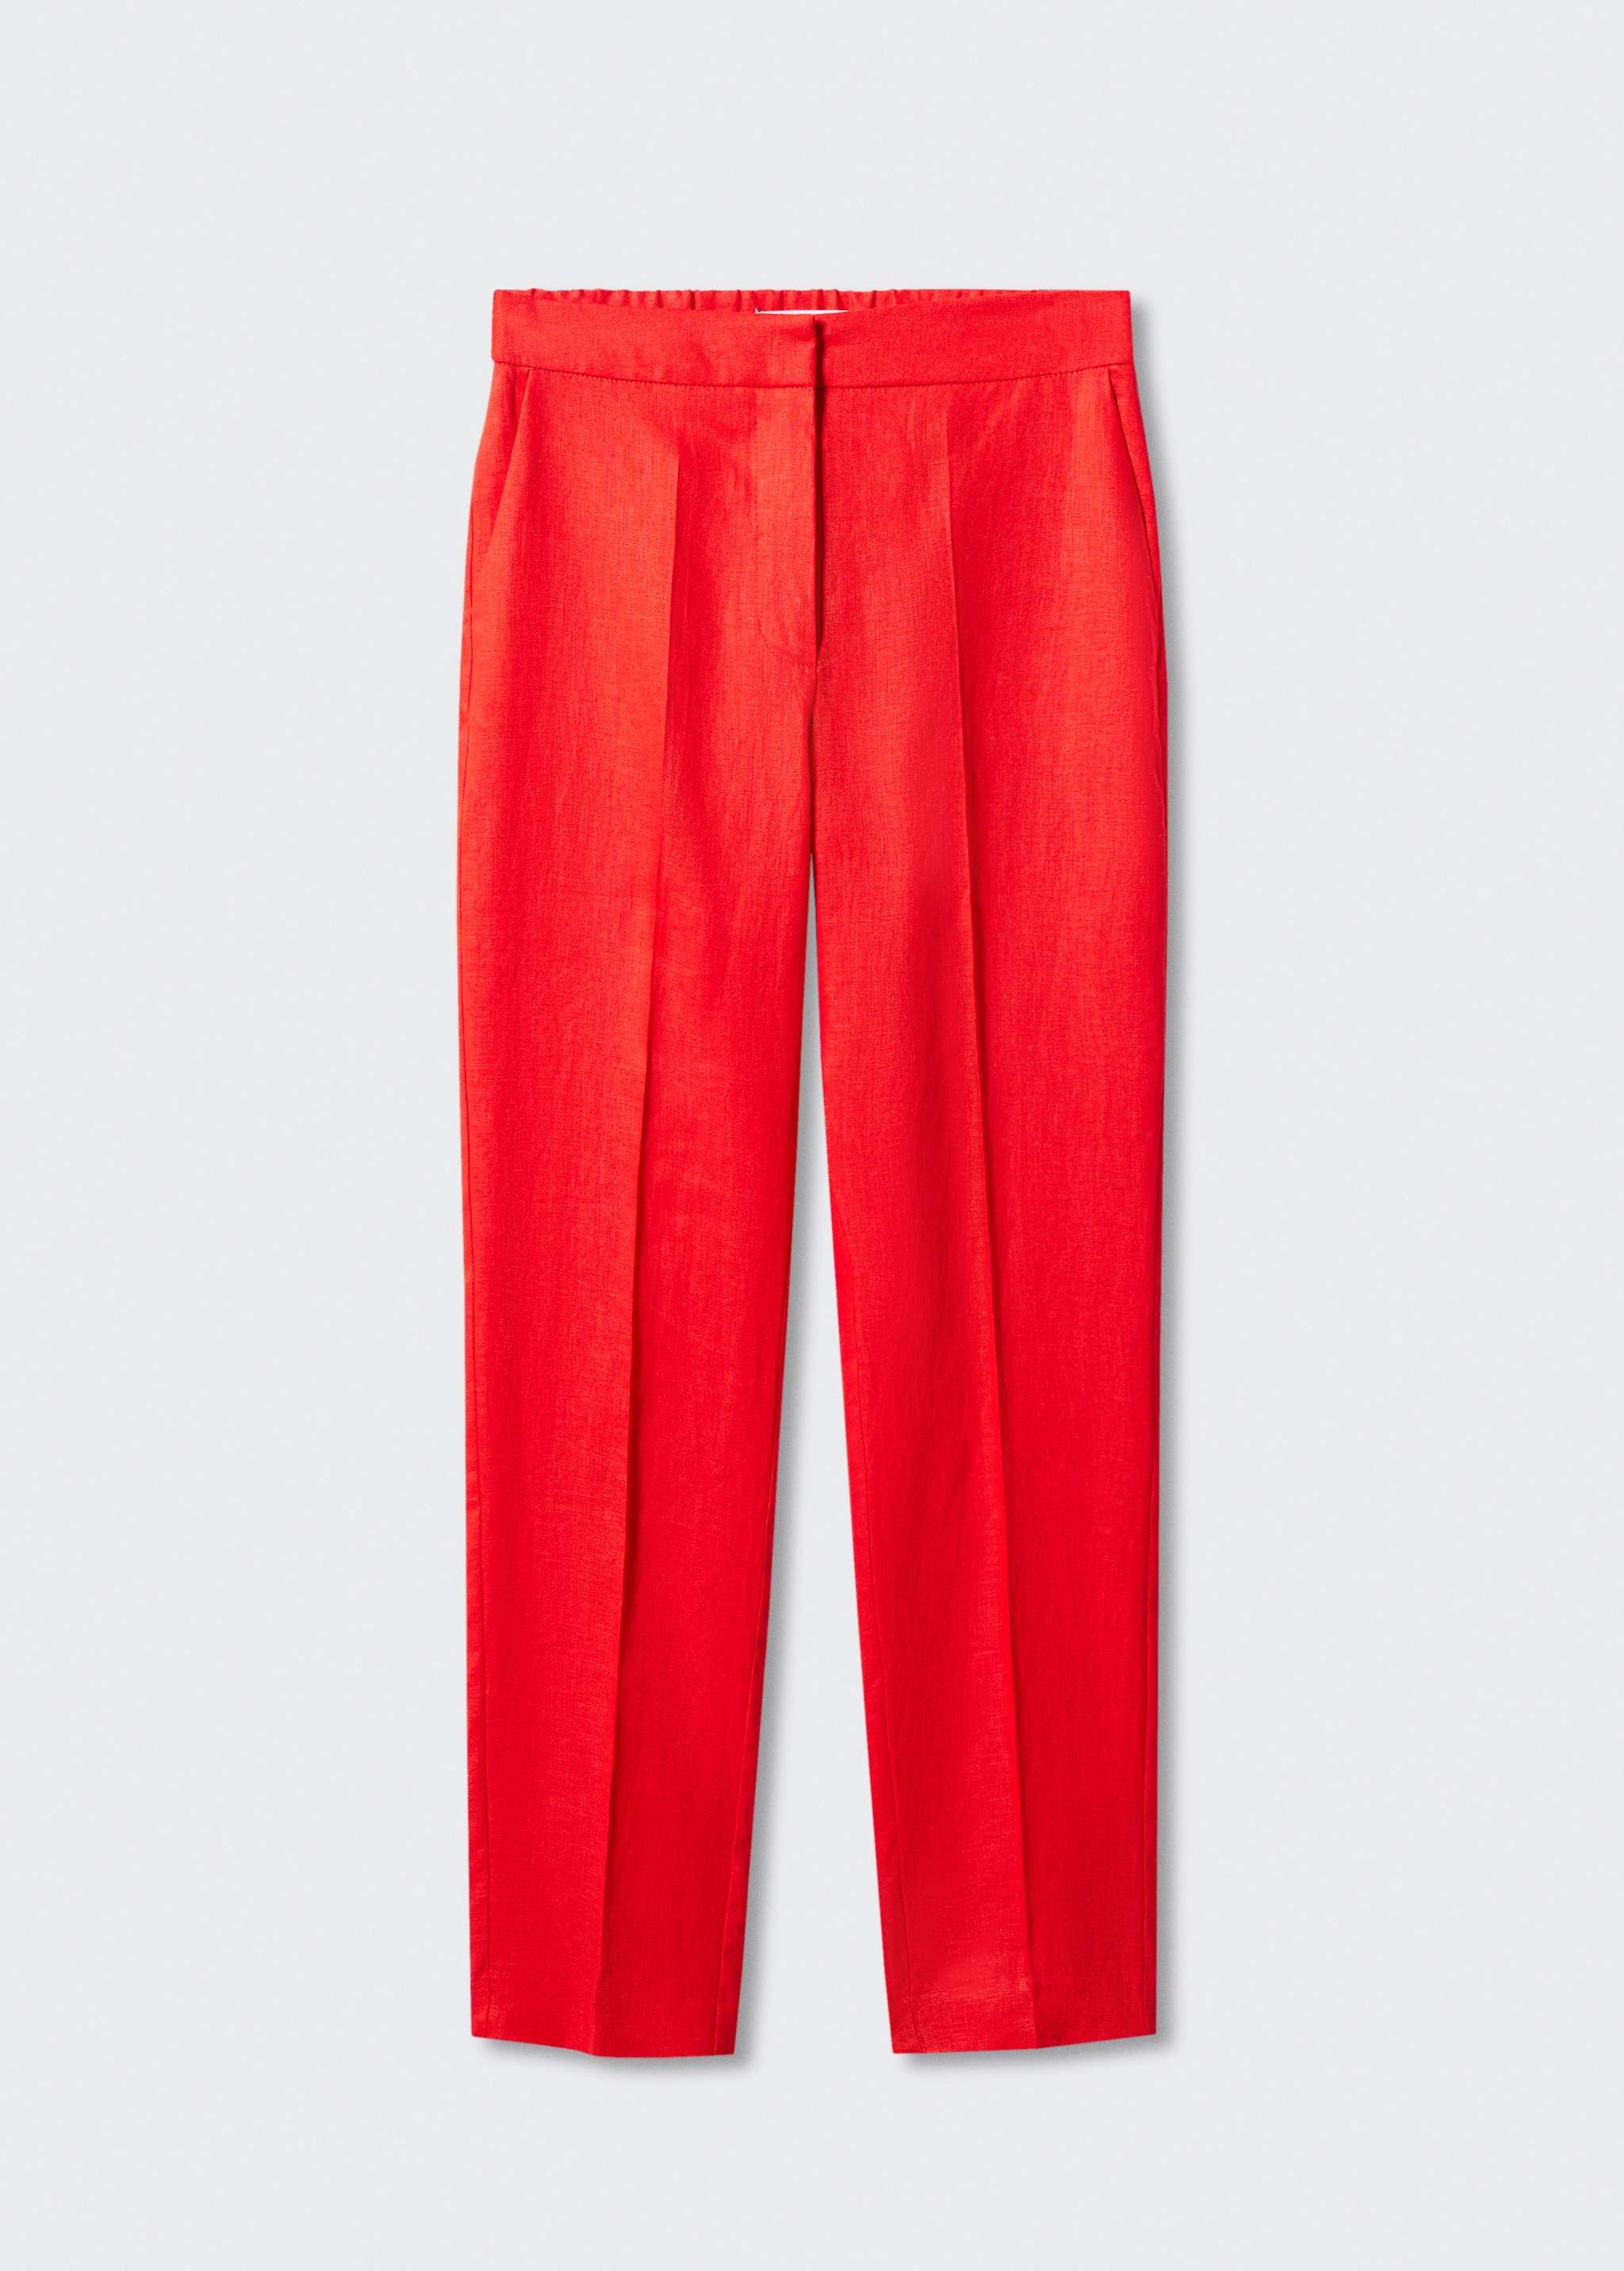 100% linen trousers - Article without model